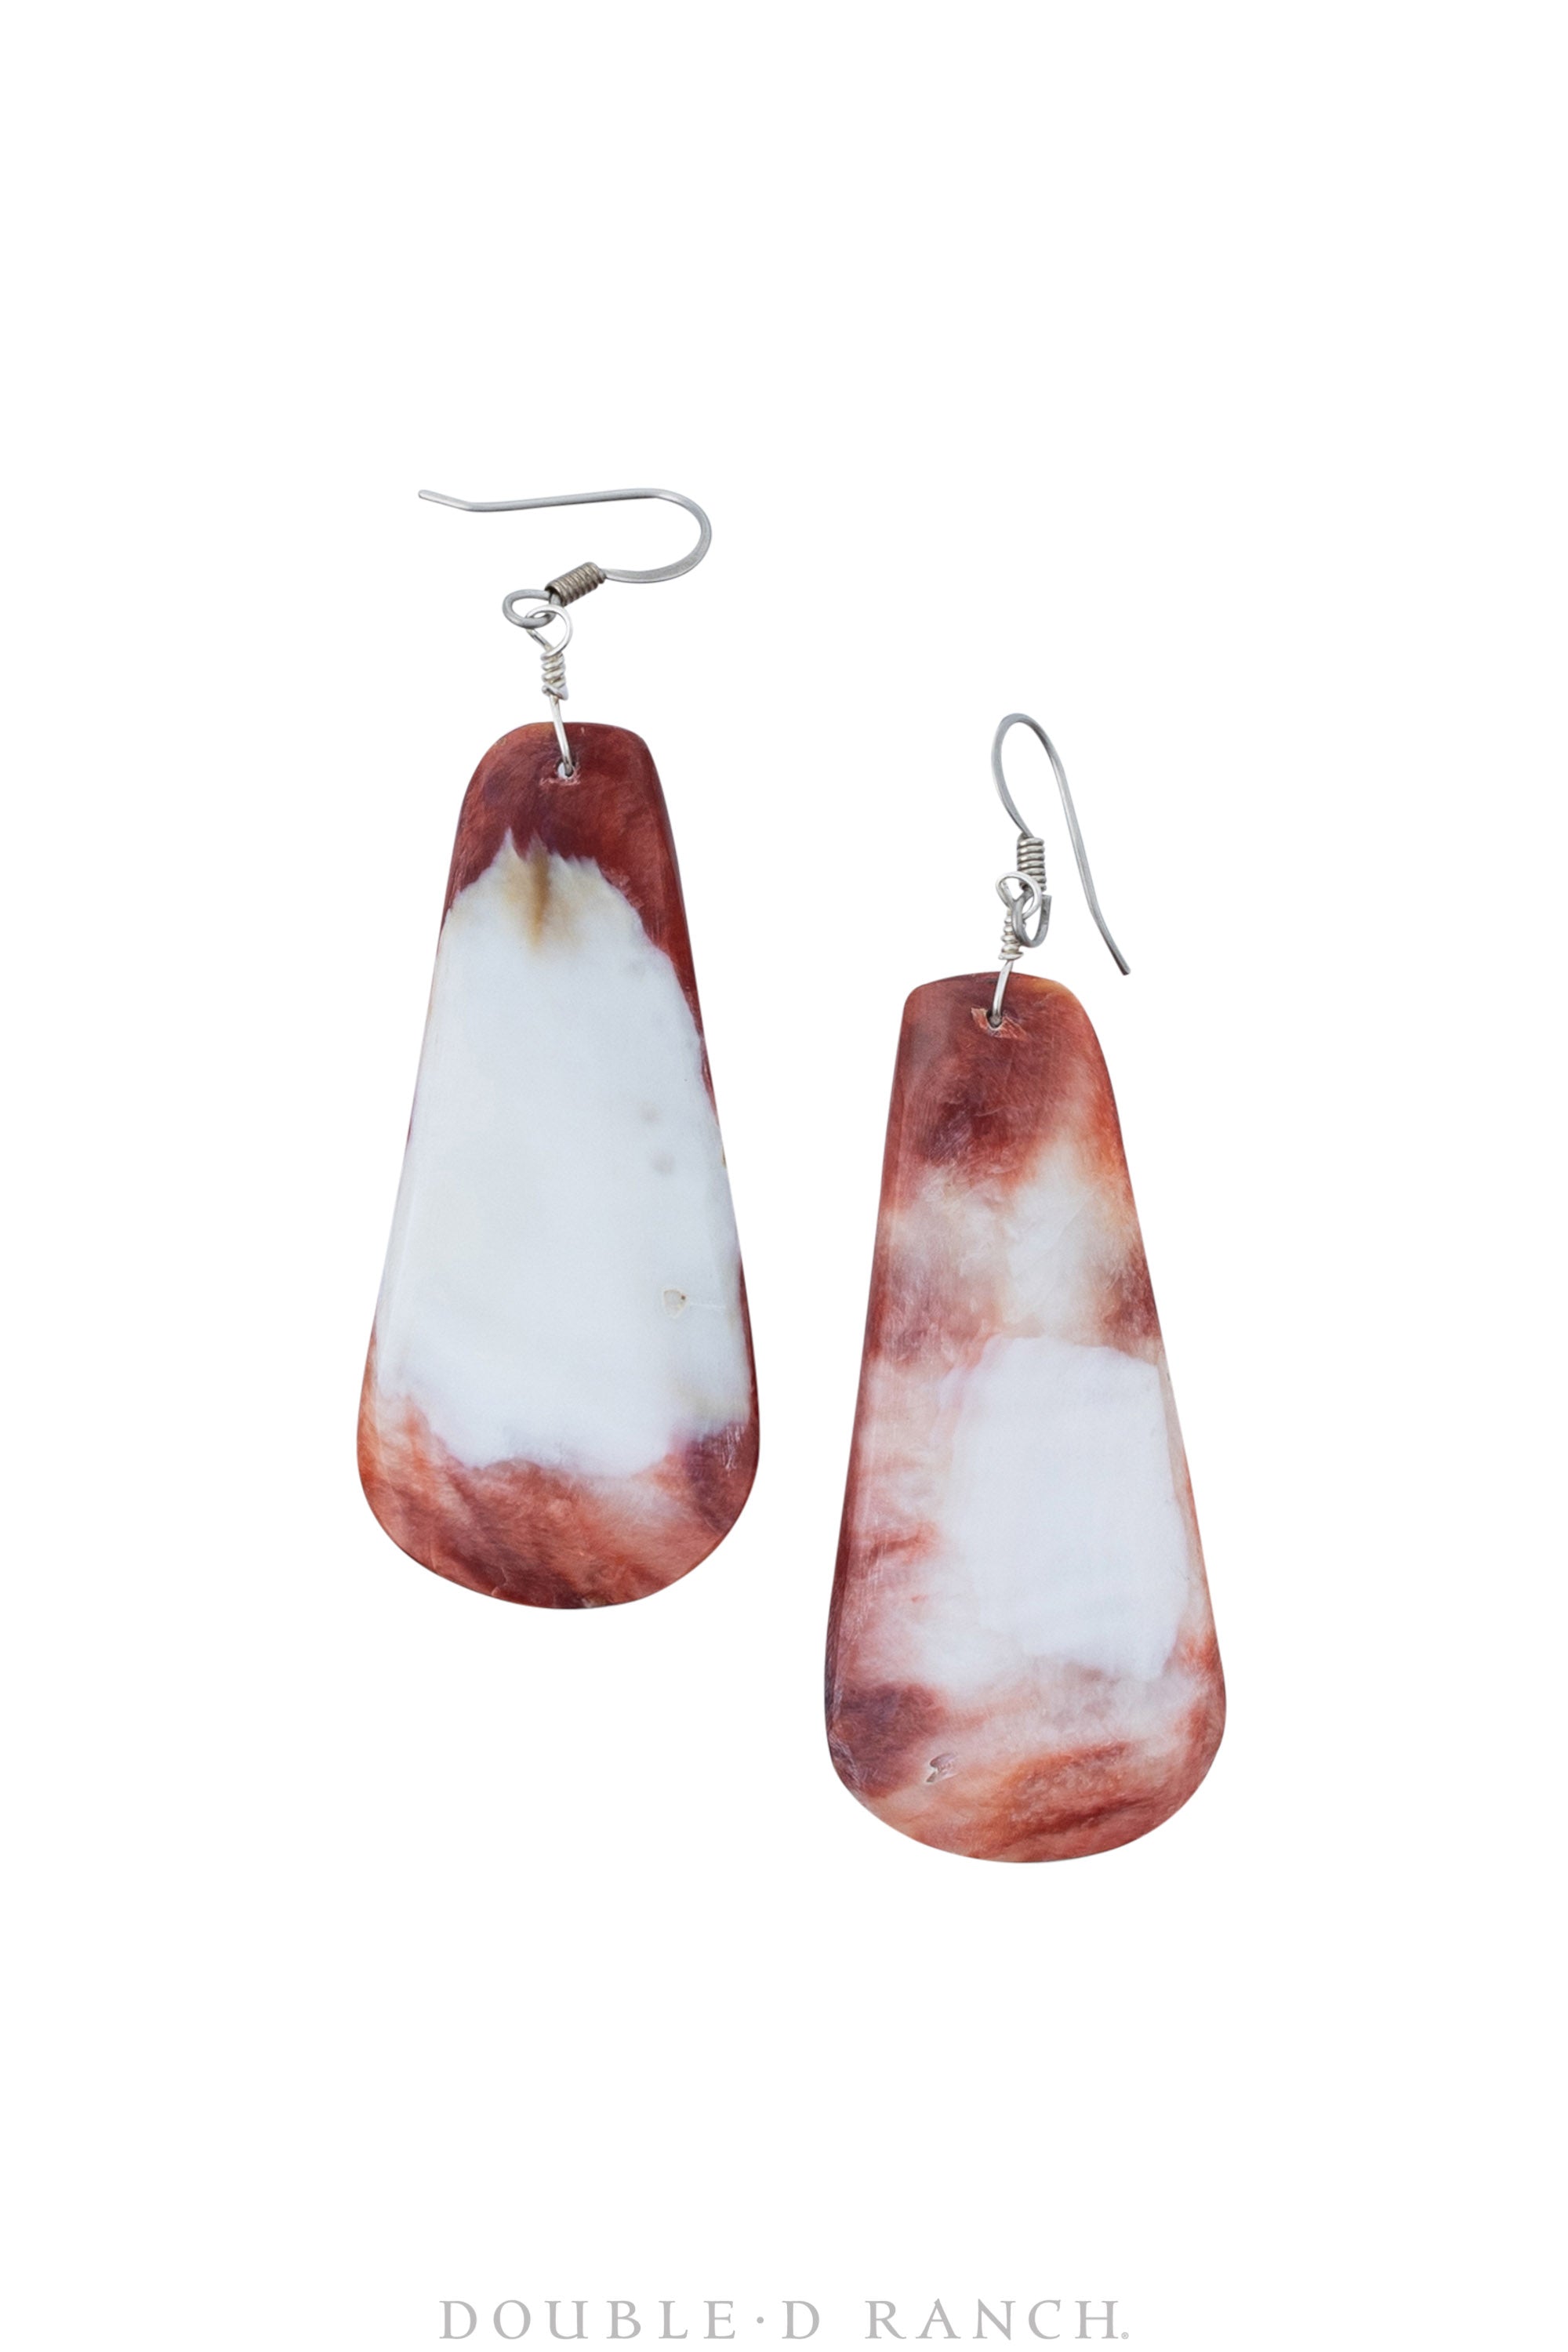 Earrings, Slab, Orange Spiny Oyster, Contemporary, 883